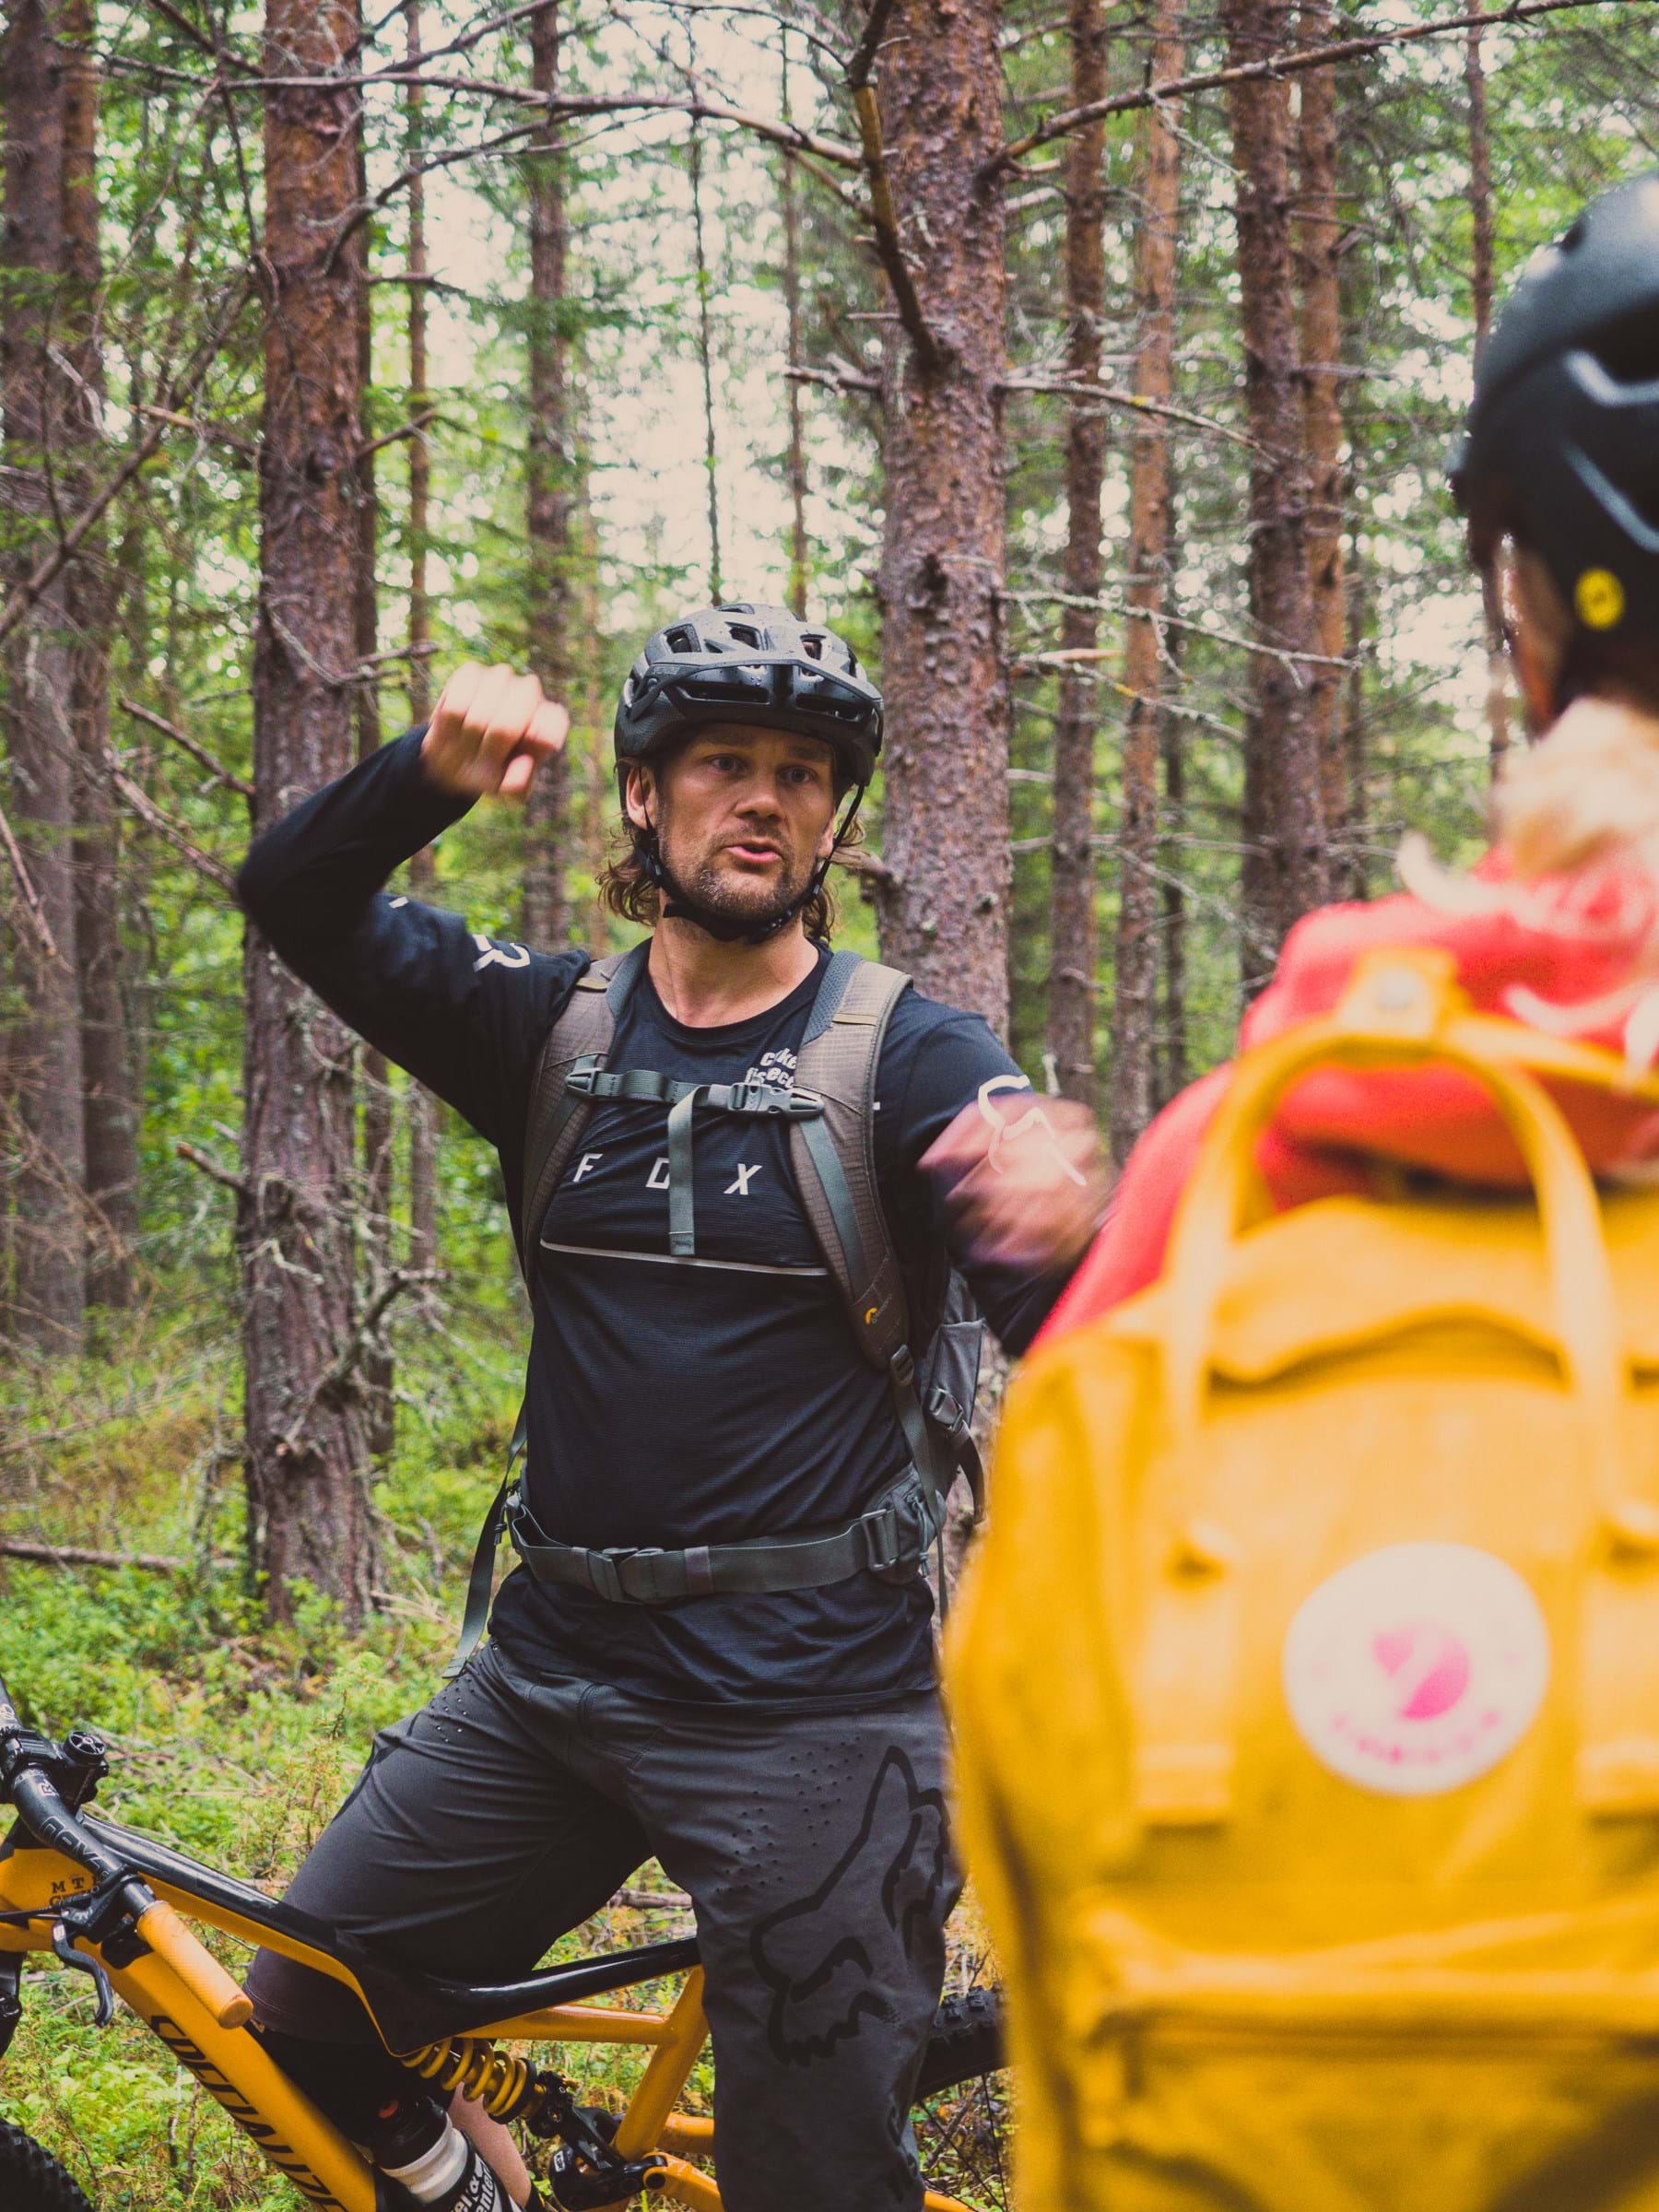 Standing in the woods, Robert is leaning against his bicycle and gesturing with great empathy.